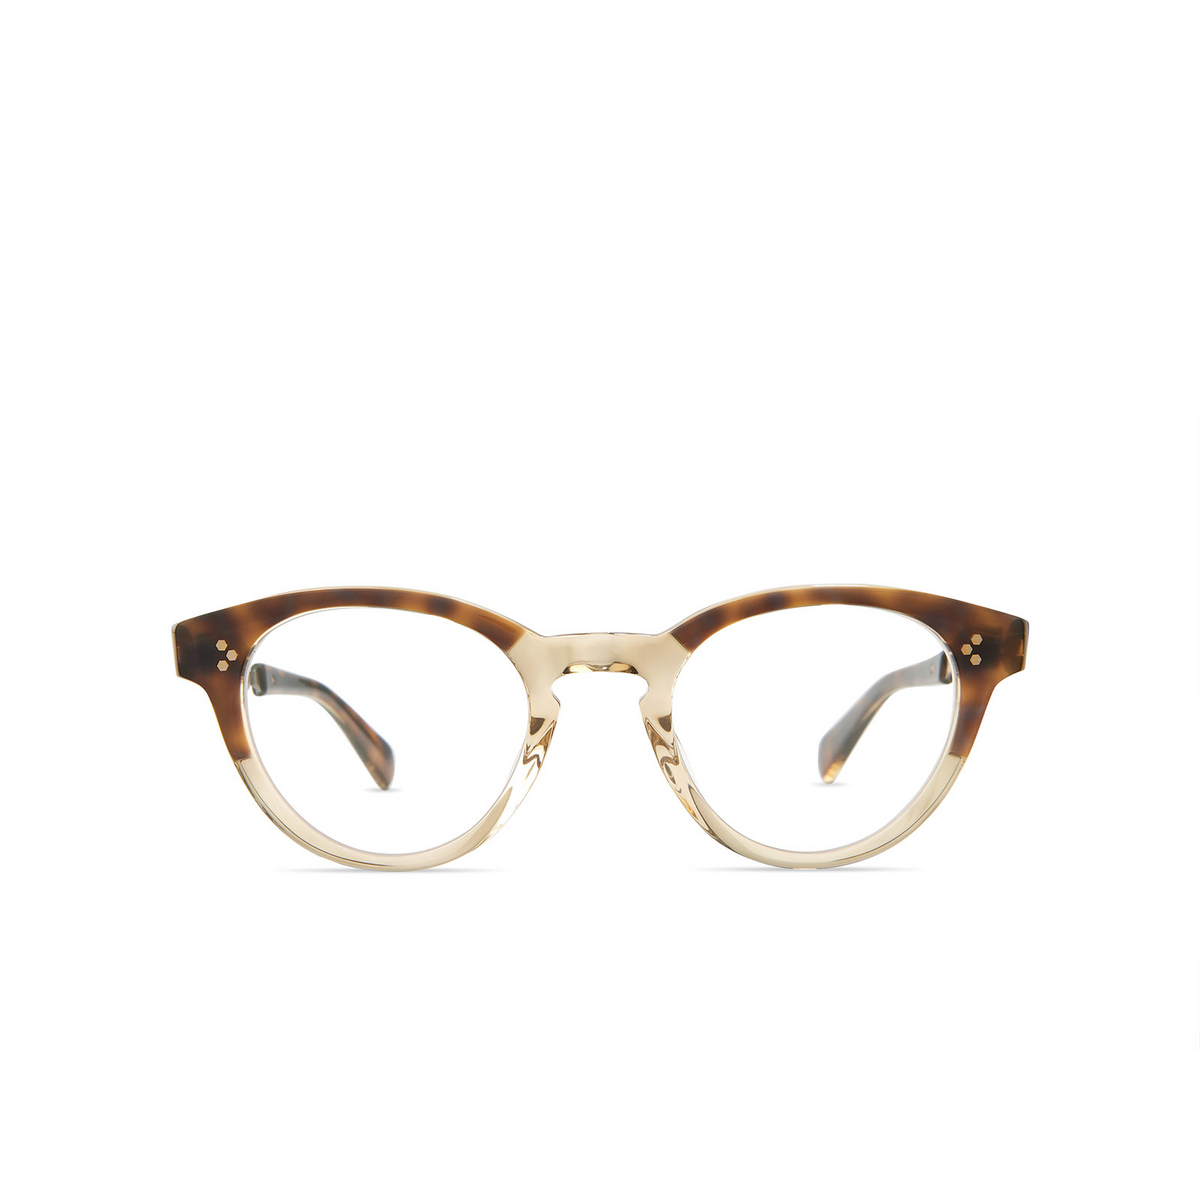 Mr. Leight AUDREY C Eyeglasses CRNSH-ATG Crown Shell-Antique Gold - front view